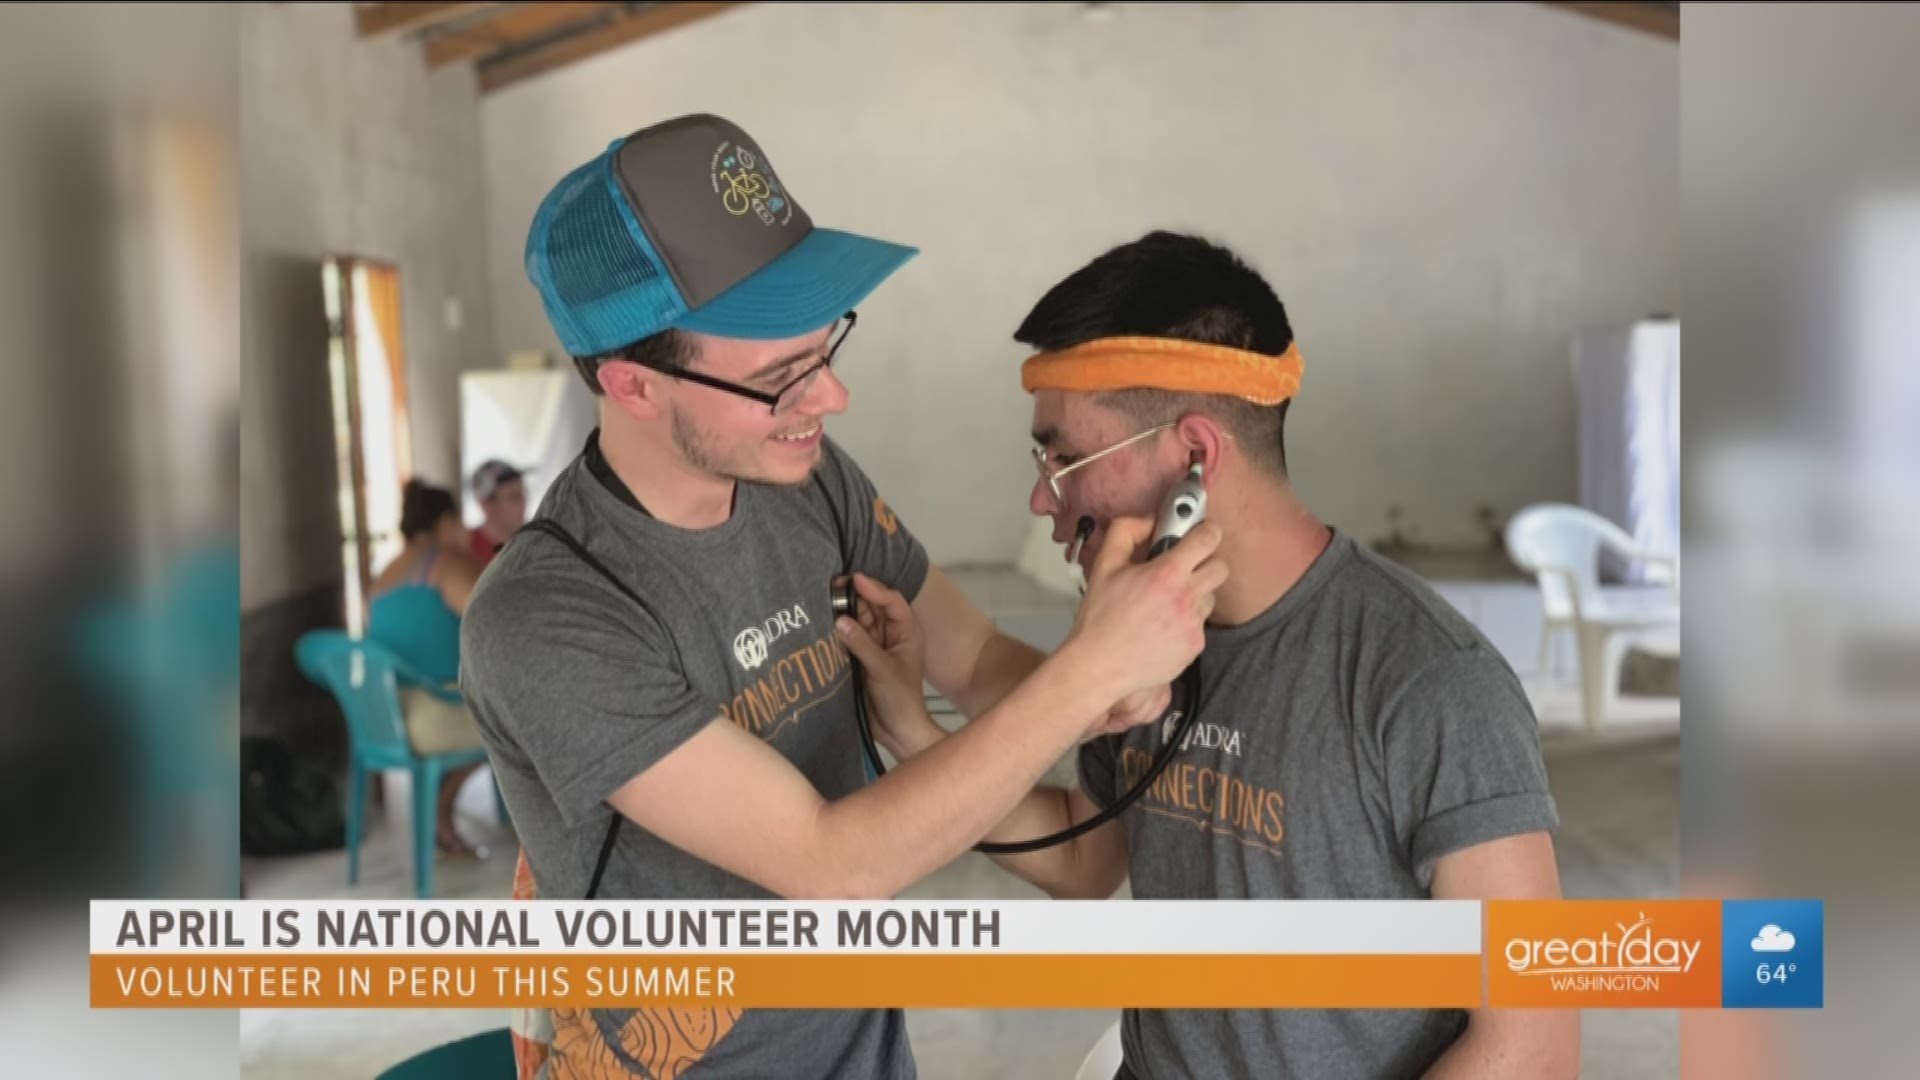 ADRA Connections program manager, Adam Wamack shares how to travel overseas while helping those in need. The international volunteering program allows people in the U.S. to help communities abroad while experiencing the world. Their 2019 summer mega volunteer trip is to Peru.